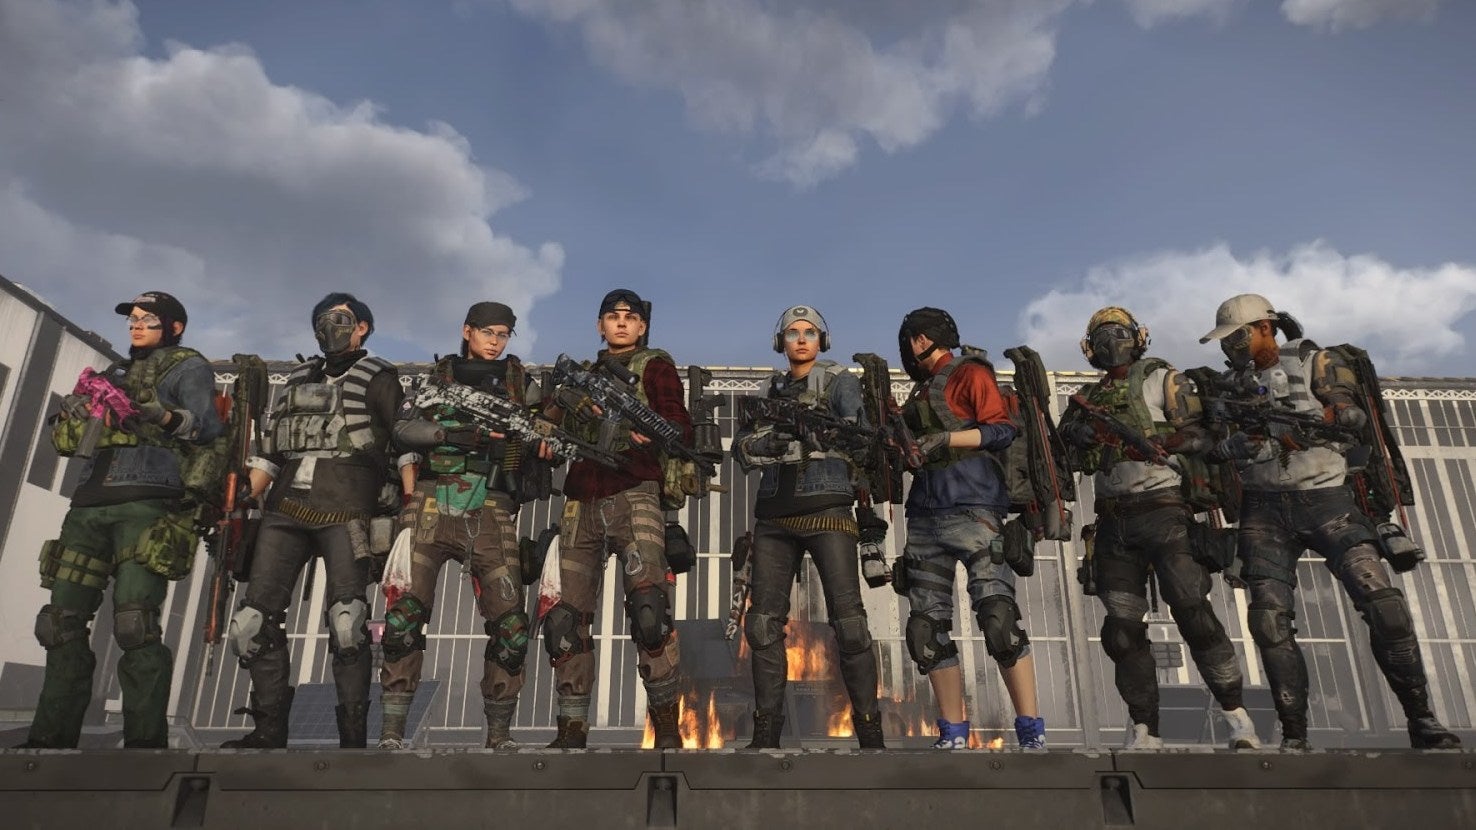 Despite The Haters, The Division 2’s All-Women Gaming Group Is Going Strong